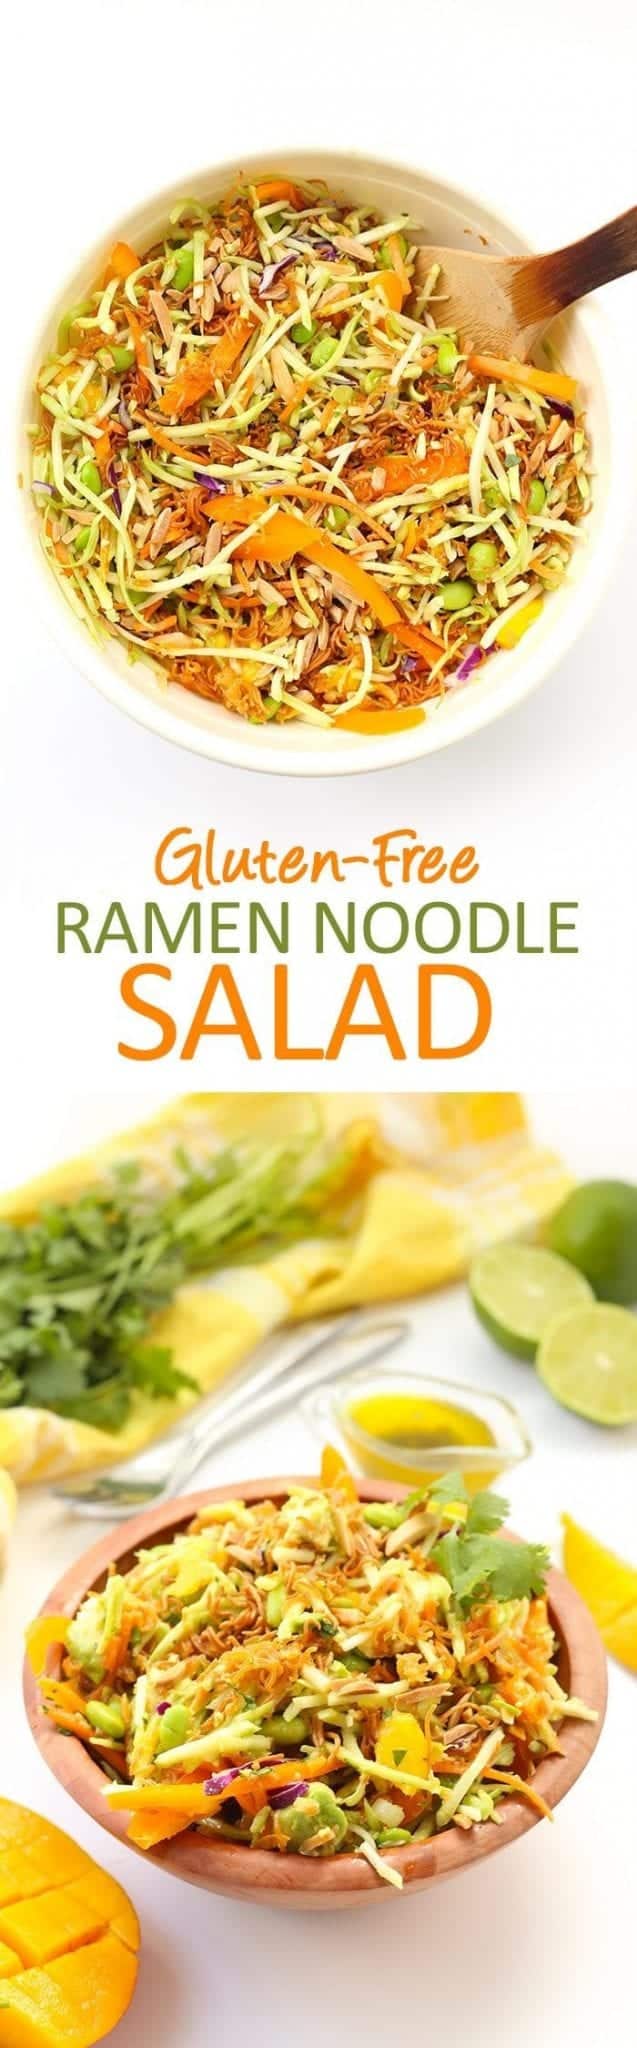 The perfect veggie-filled recipe full of flavour and crunch will make this Gluten-Free Ramen Noodle Salad your new favorite. Using gluten-free ramen noodles and a cilantro-lime dressing, this salad will become a meal staple.